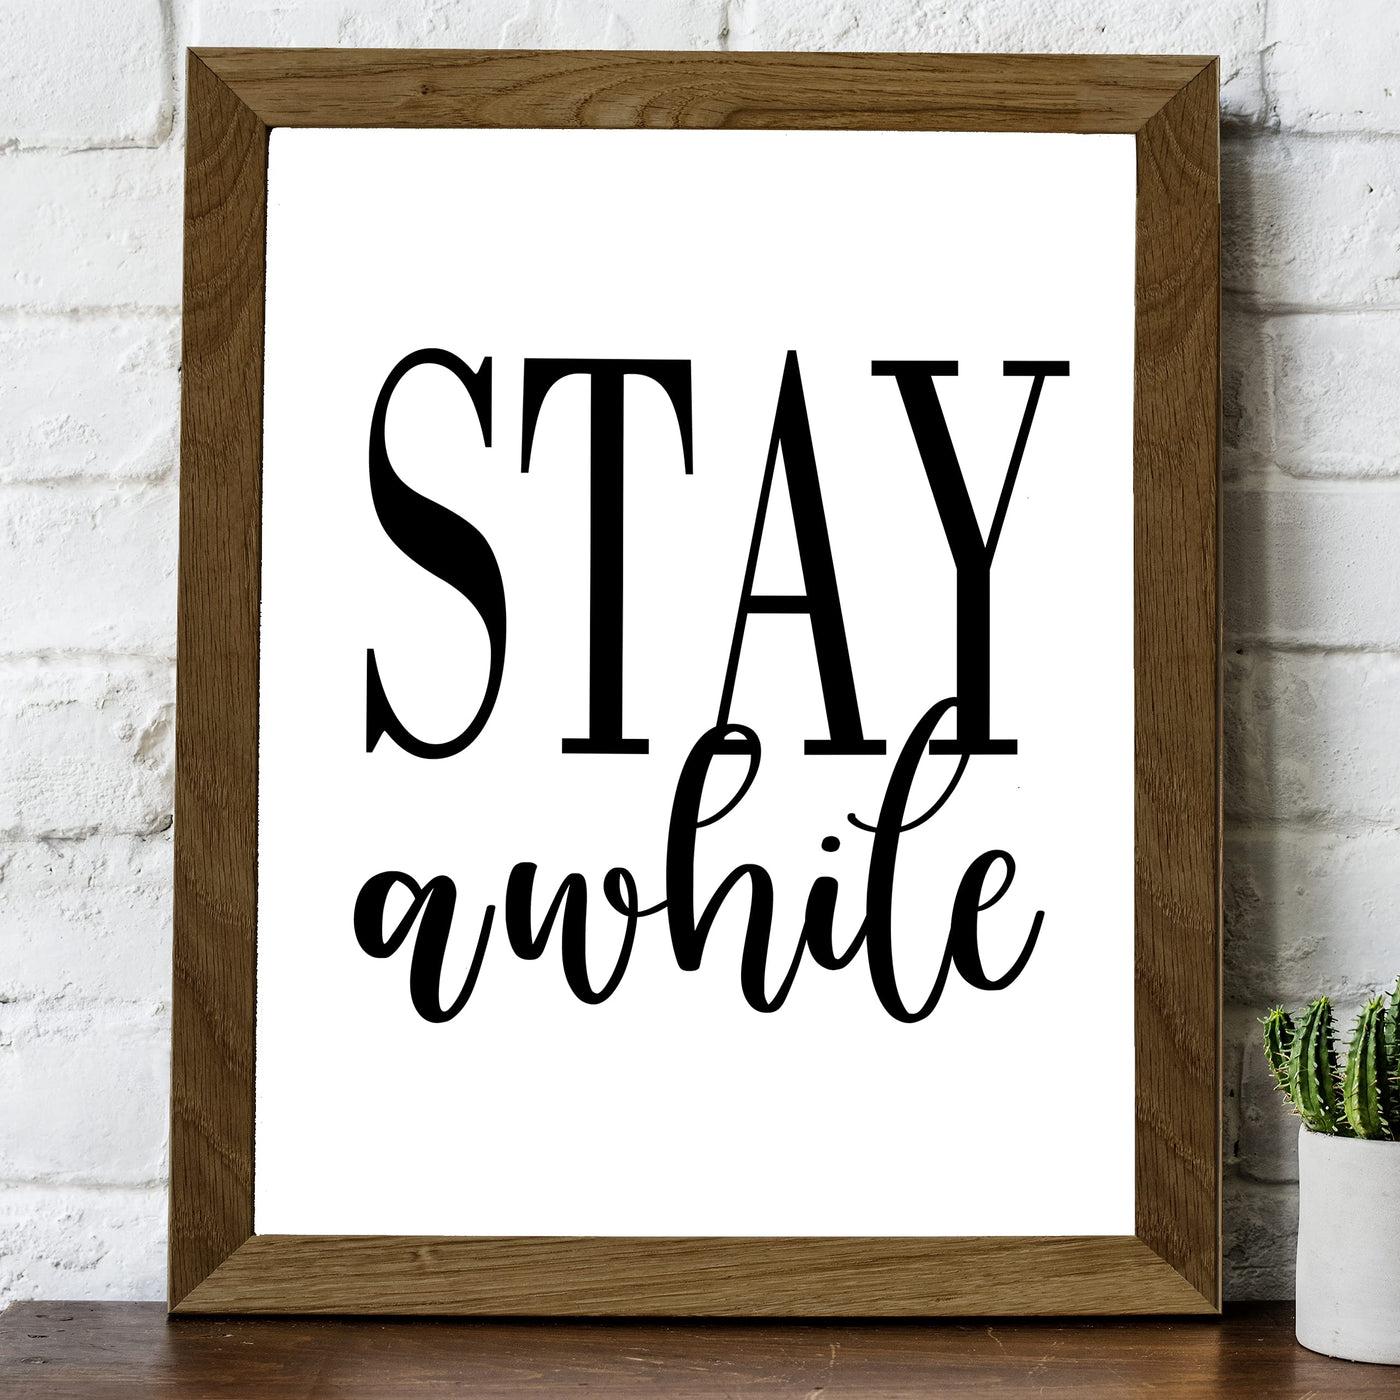 Stay Awhile-Welcome Sign Wall Art -8 x 10" Country Rustic Print -Ready to Frame. Modern Farmhouse Design. Home-Entry-Guest Room Decor. Perfect Decoration for the Cabin-Lake-Beach House! Great Gift!